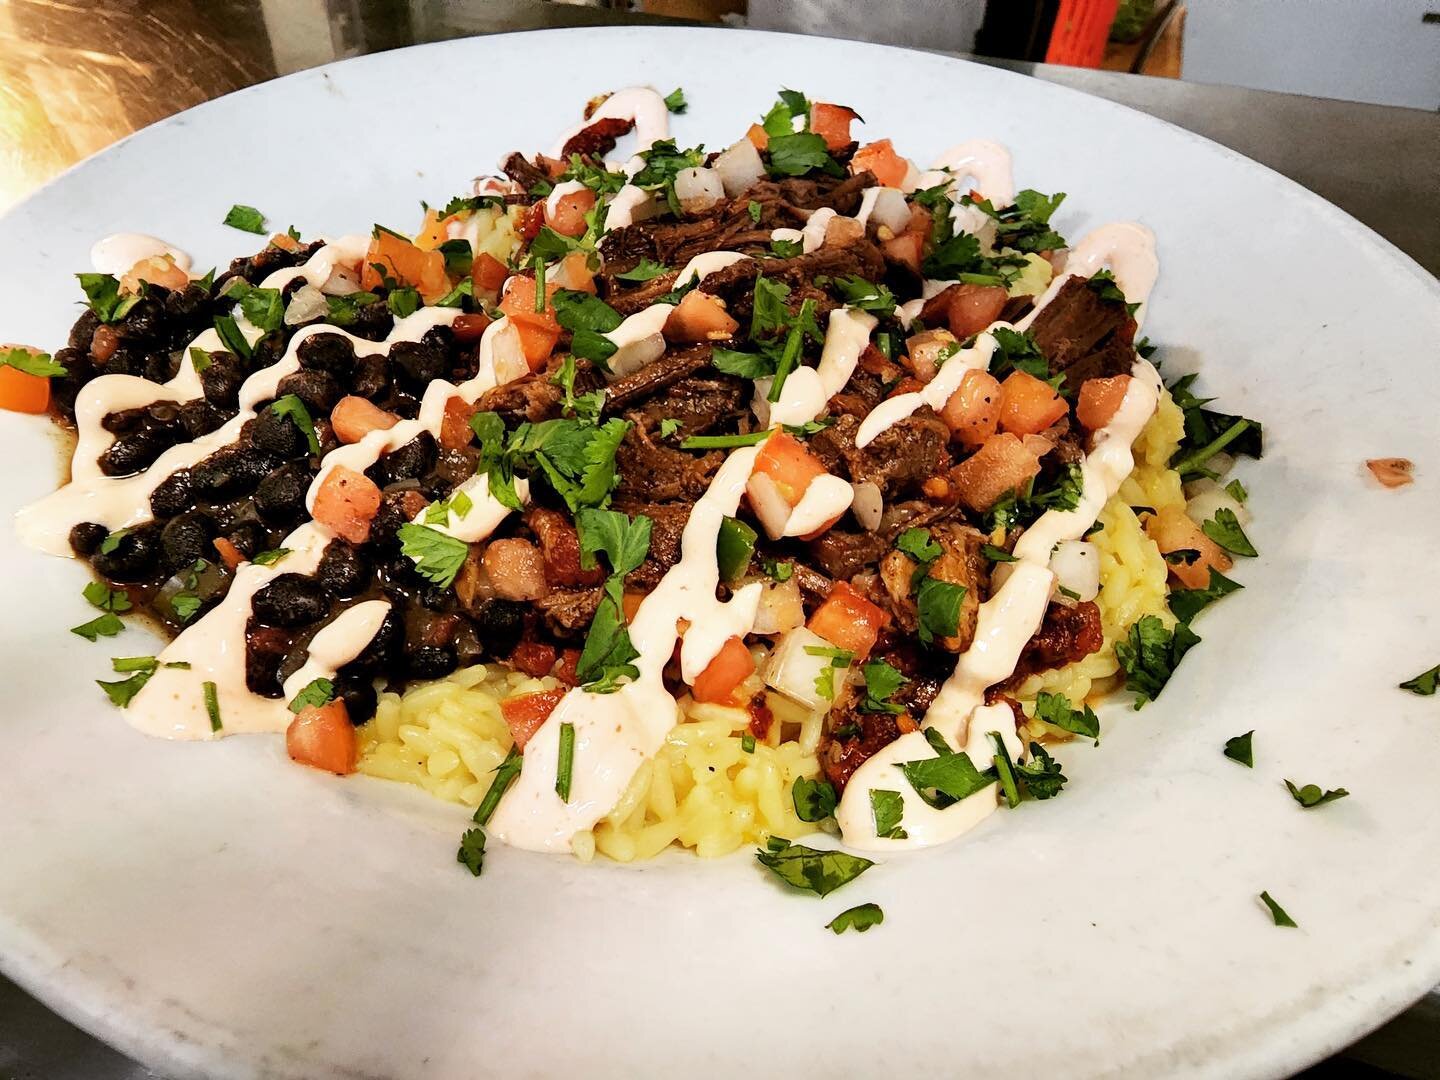 We slow roasted our beef brisket and made some delicious specials for this weekend! Ropa vieja and braised beef tacos.